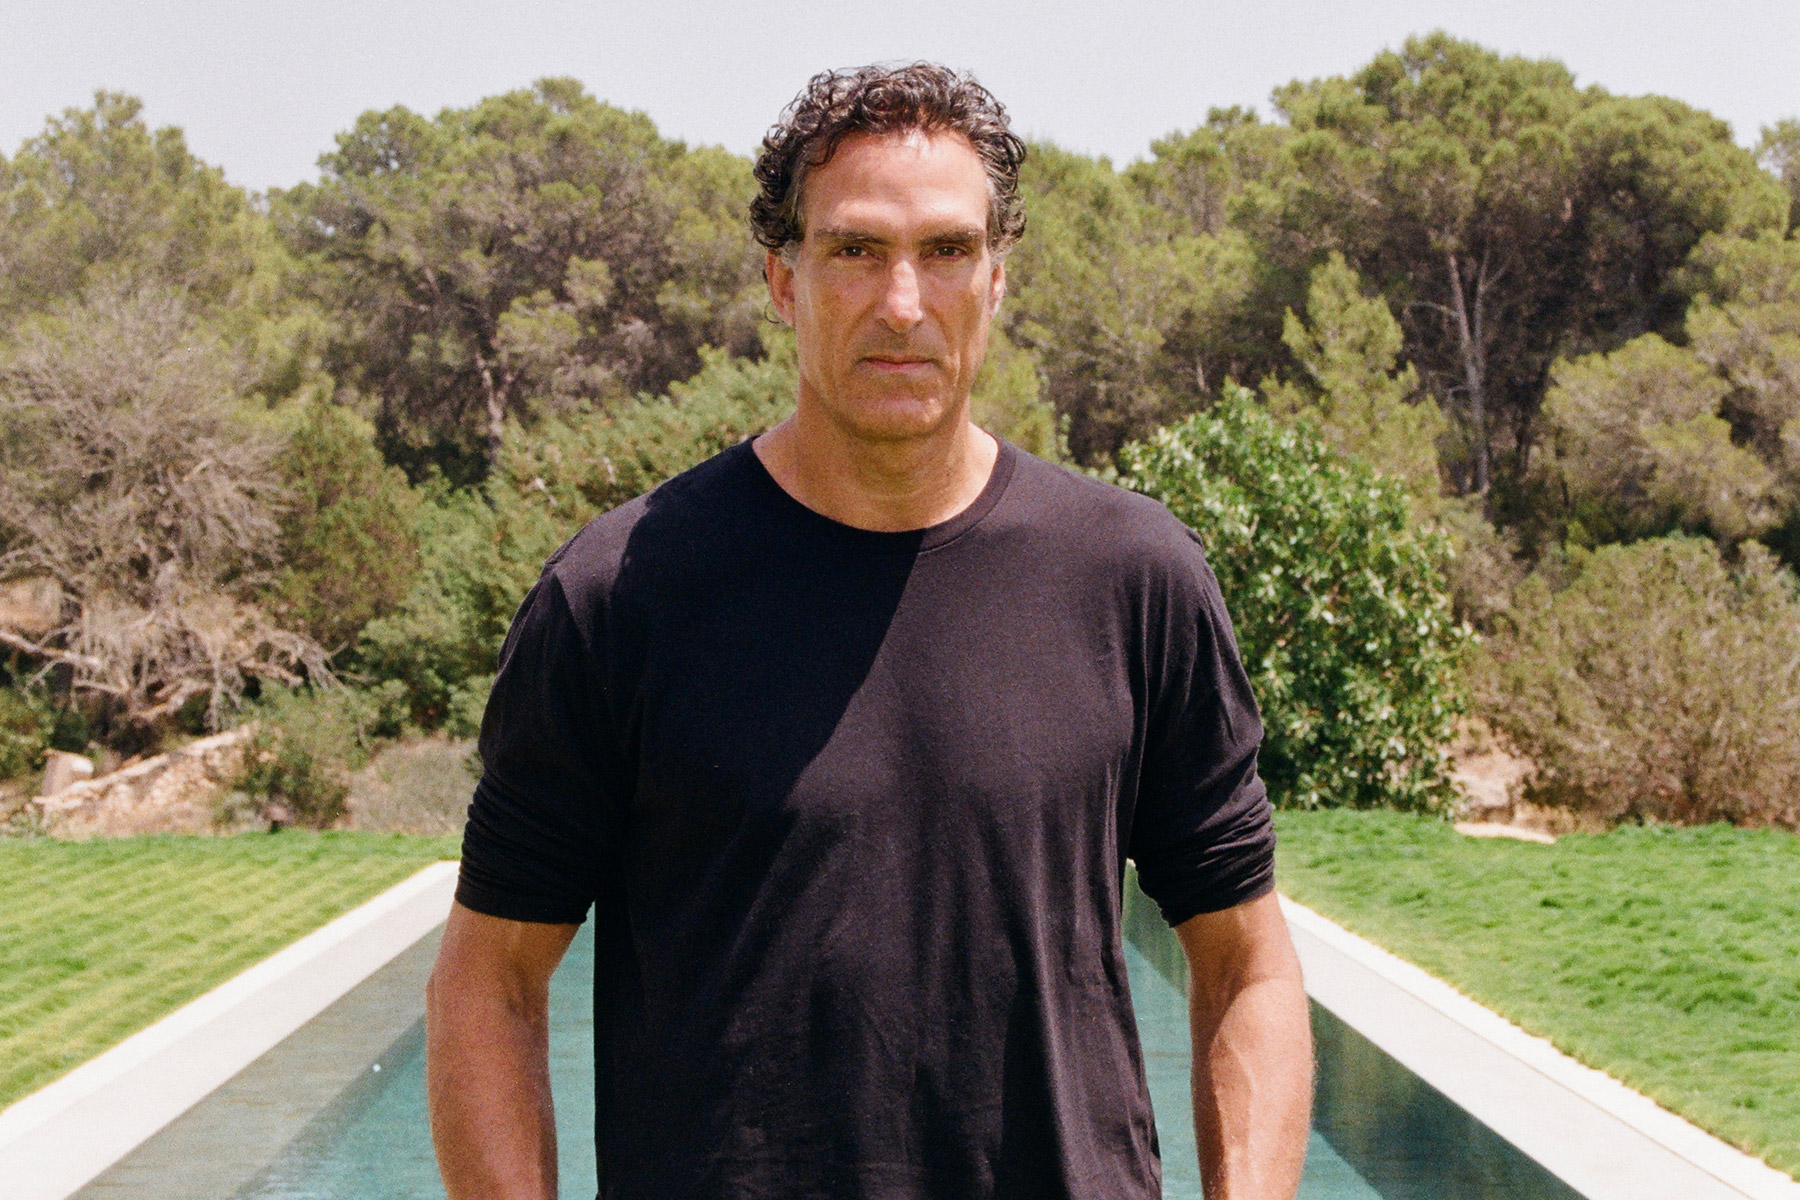 Rony Seikaly reimagines clasisc track ‘I Am Not In Love’.